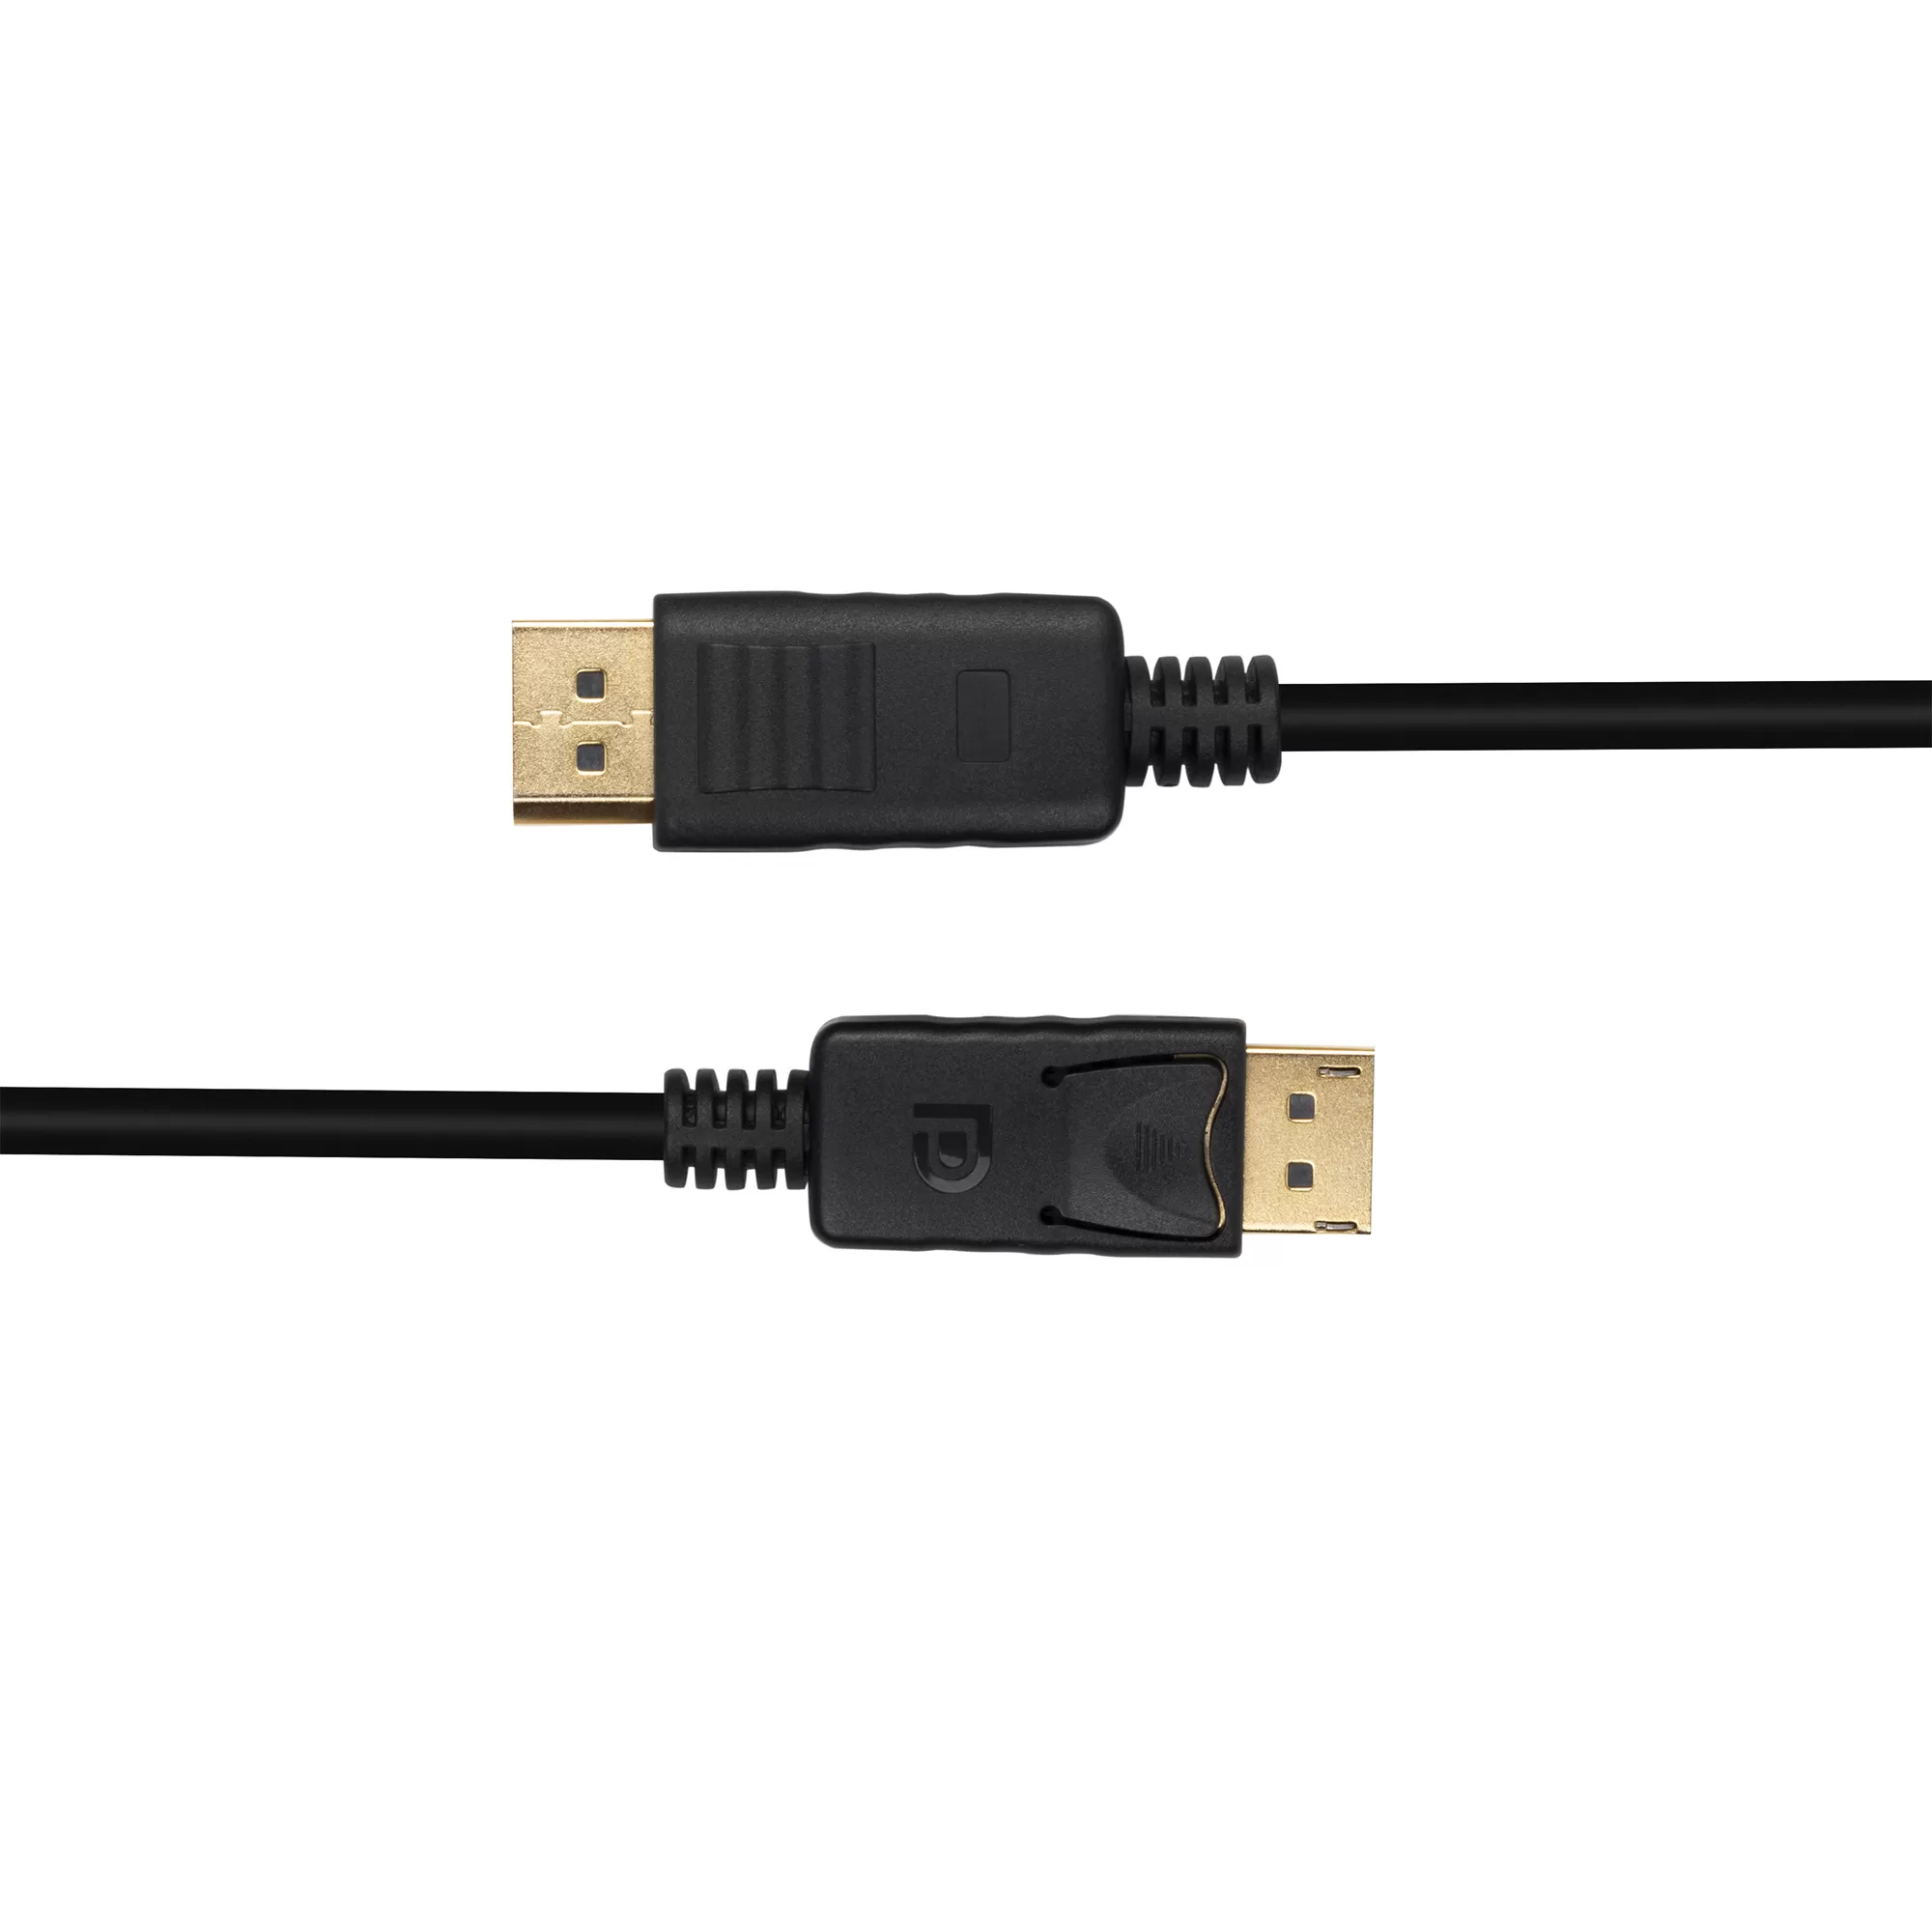 Displayport1.2 Male to Male cable 4K@60Hz ABS shell